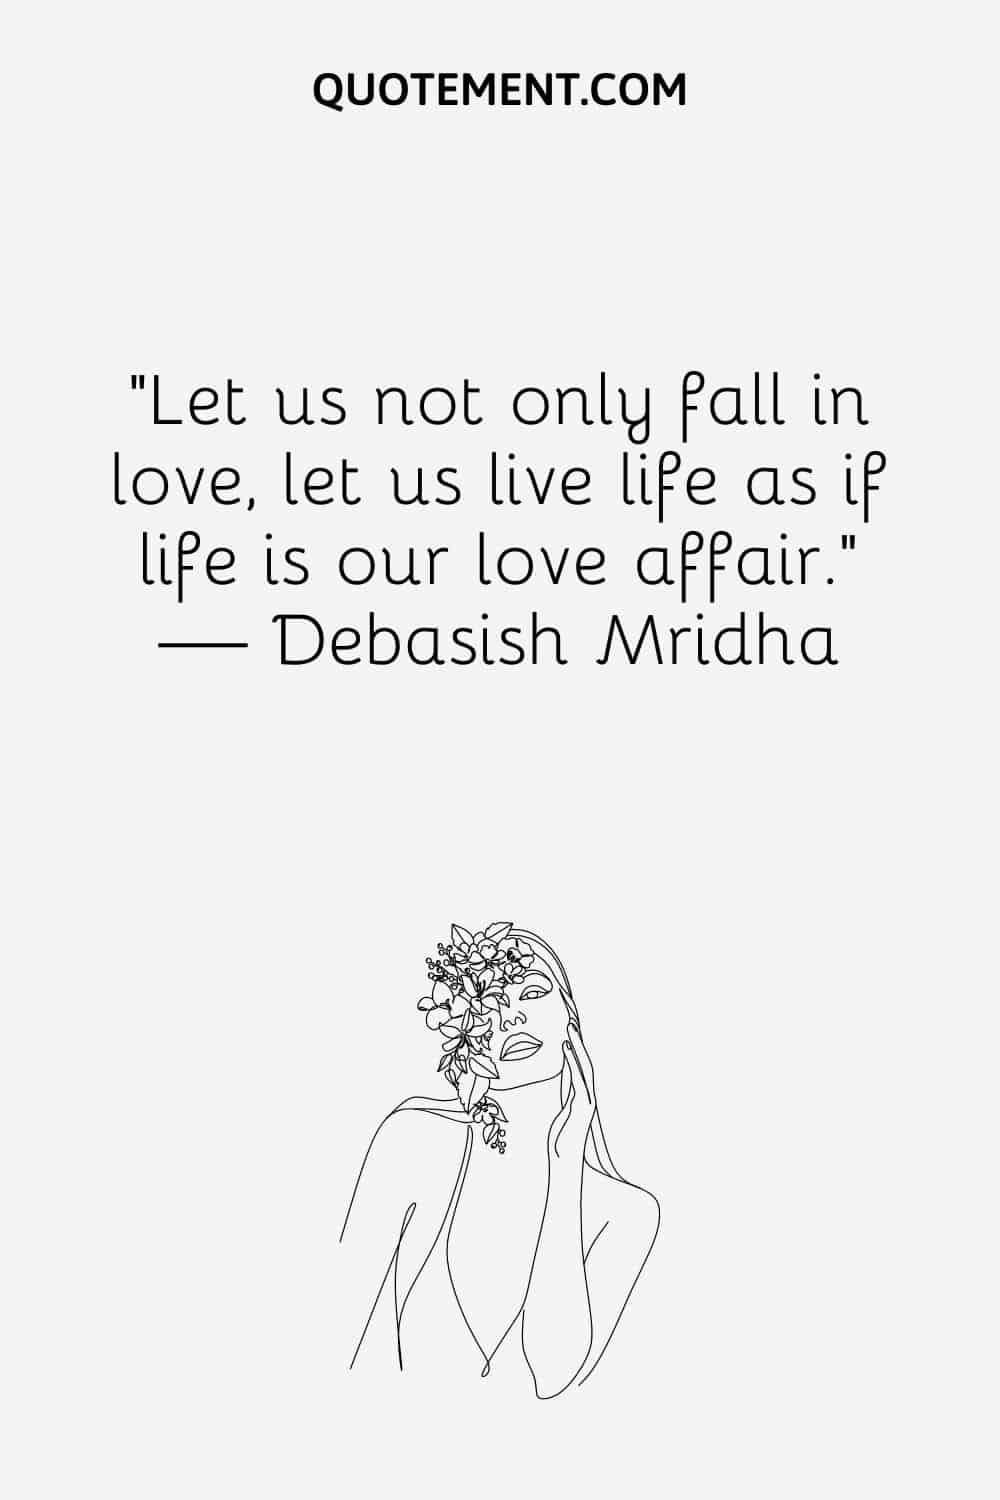 “Let us not only fall in love, let us live life as if life is our love affair.” ― Debasish Mridha